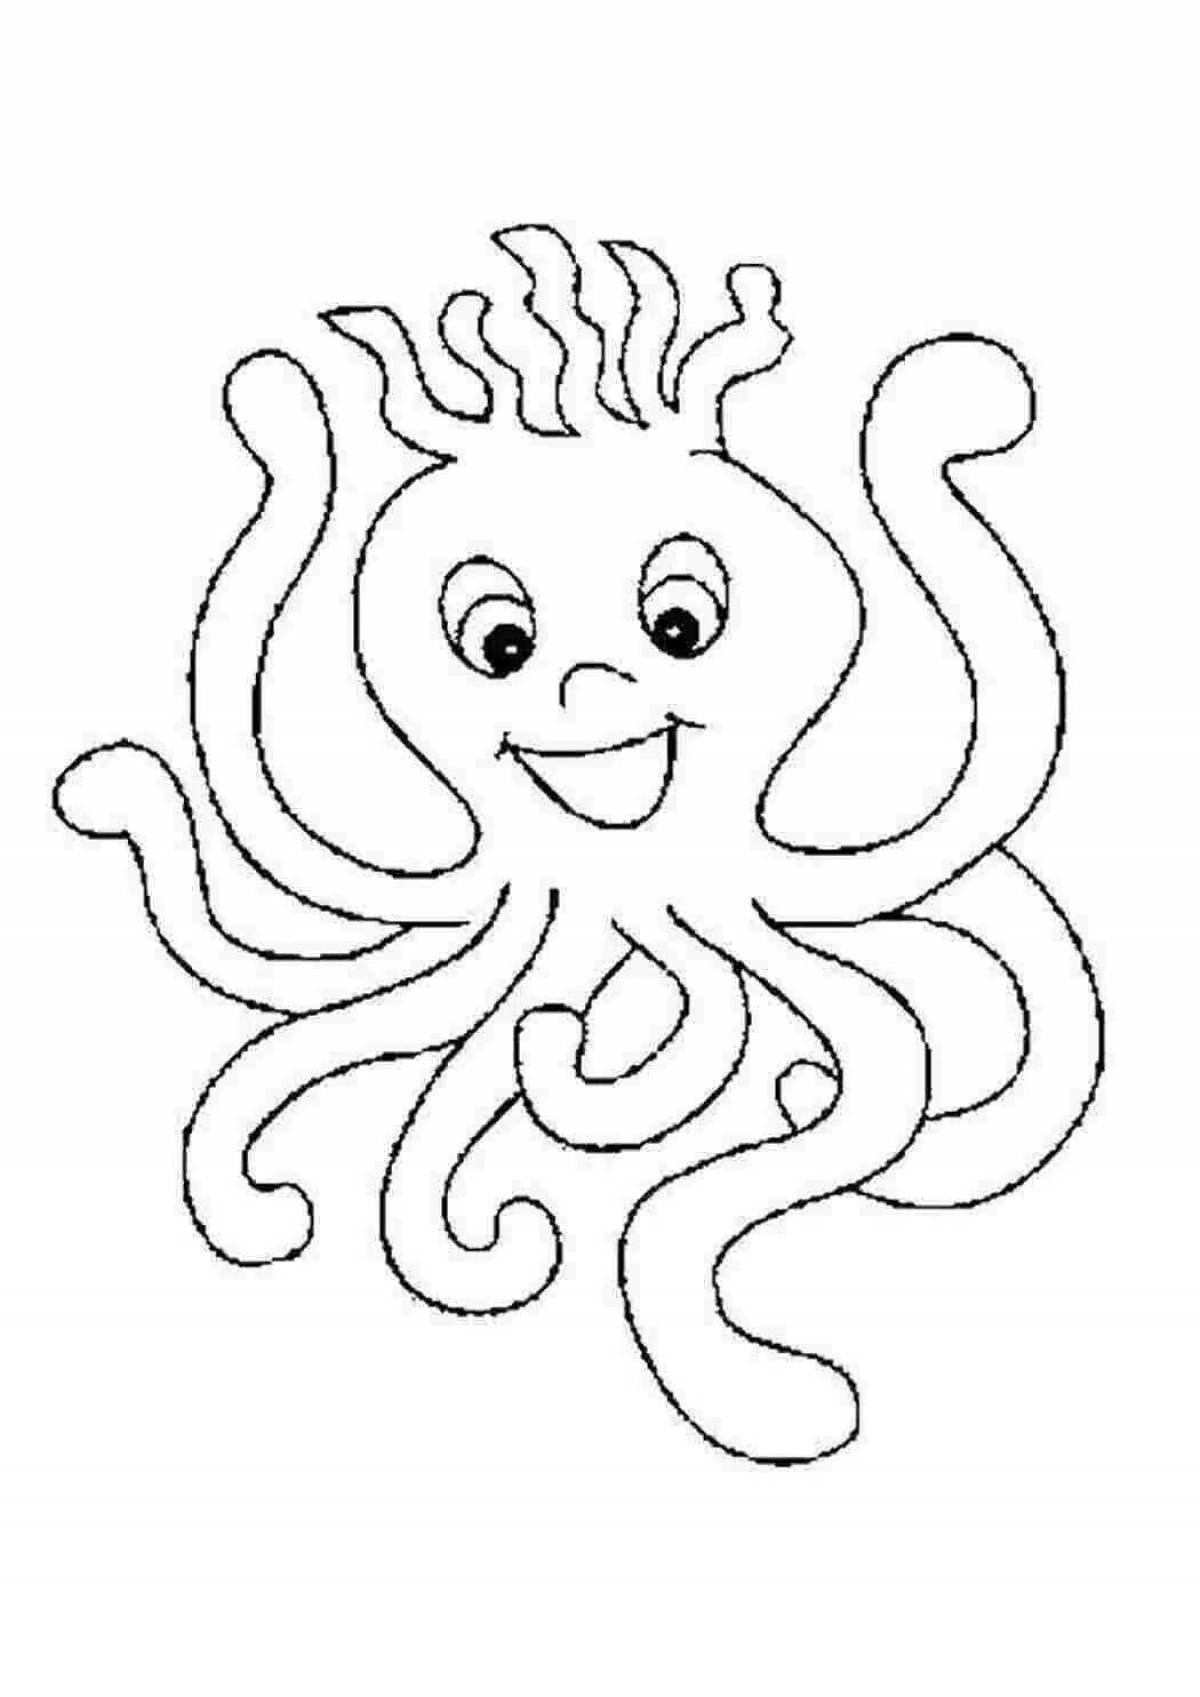 Amazing octopus coloring page for little ones